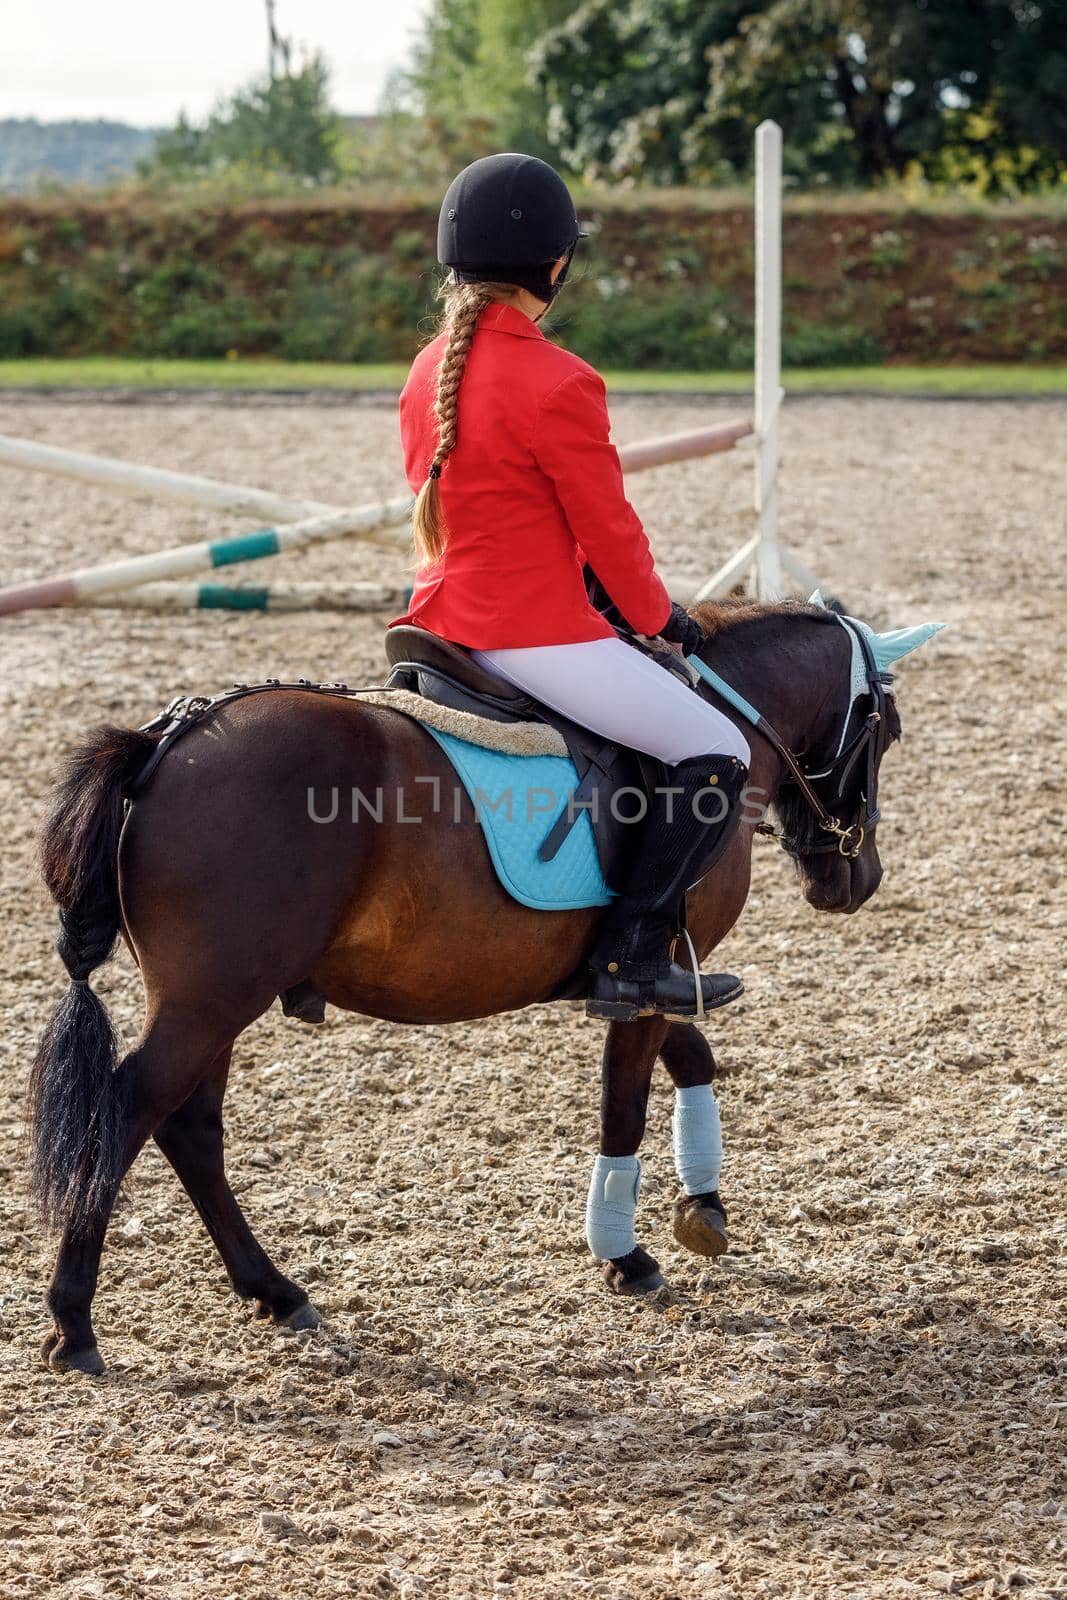 Girl in red riding clothing riding on pony over small jumps.